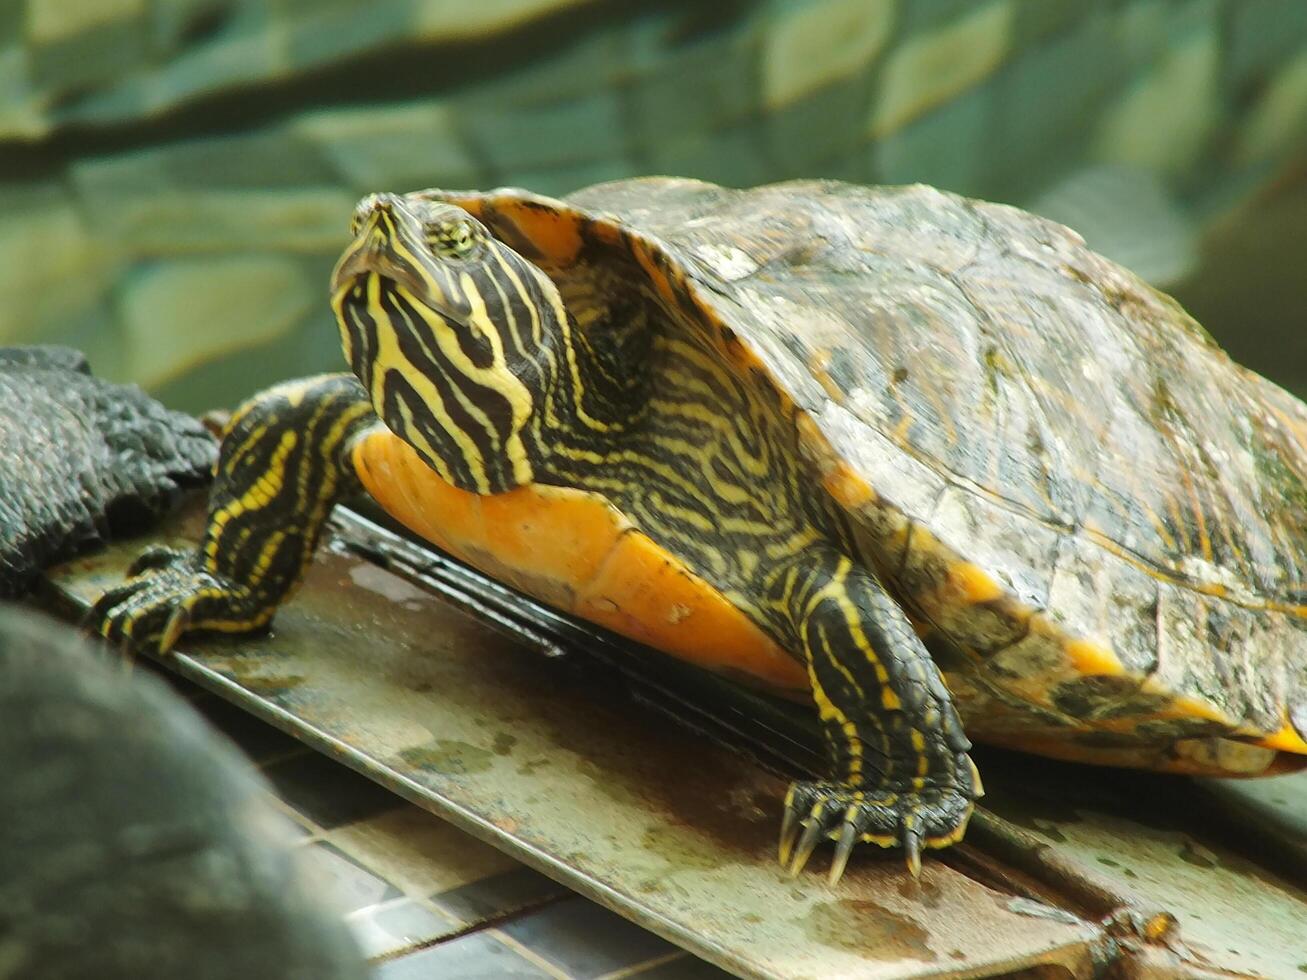 A close up shot of a red eared turtle, Trachemys scripta elegans, resting in sunlight. Painted turtle is a reptile familiar to become a pet for some hobbyist. photo